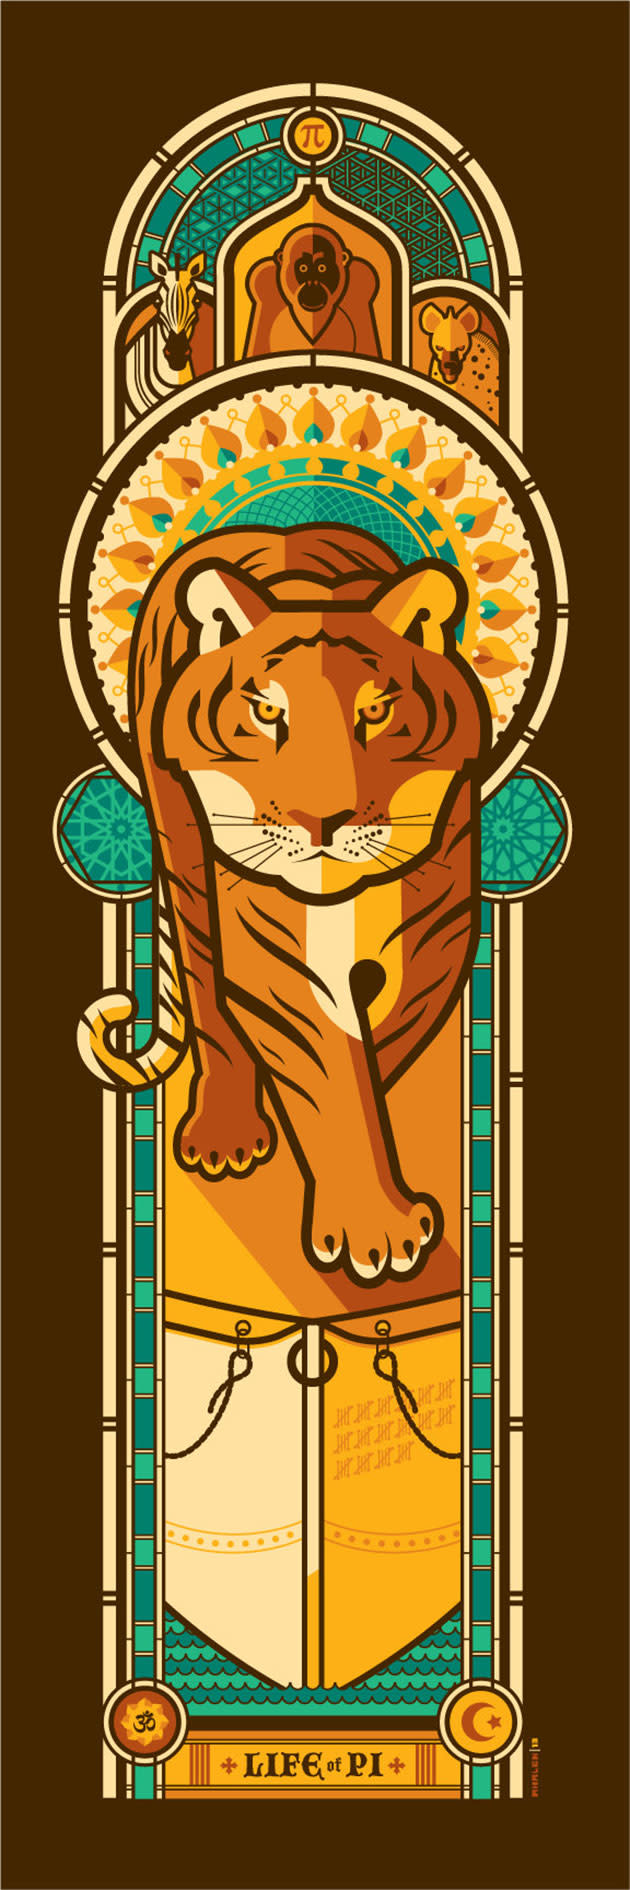 <b>Life of Pi</b><br> By Tom Whalen<br>(Credit: Gallery1988)